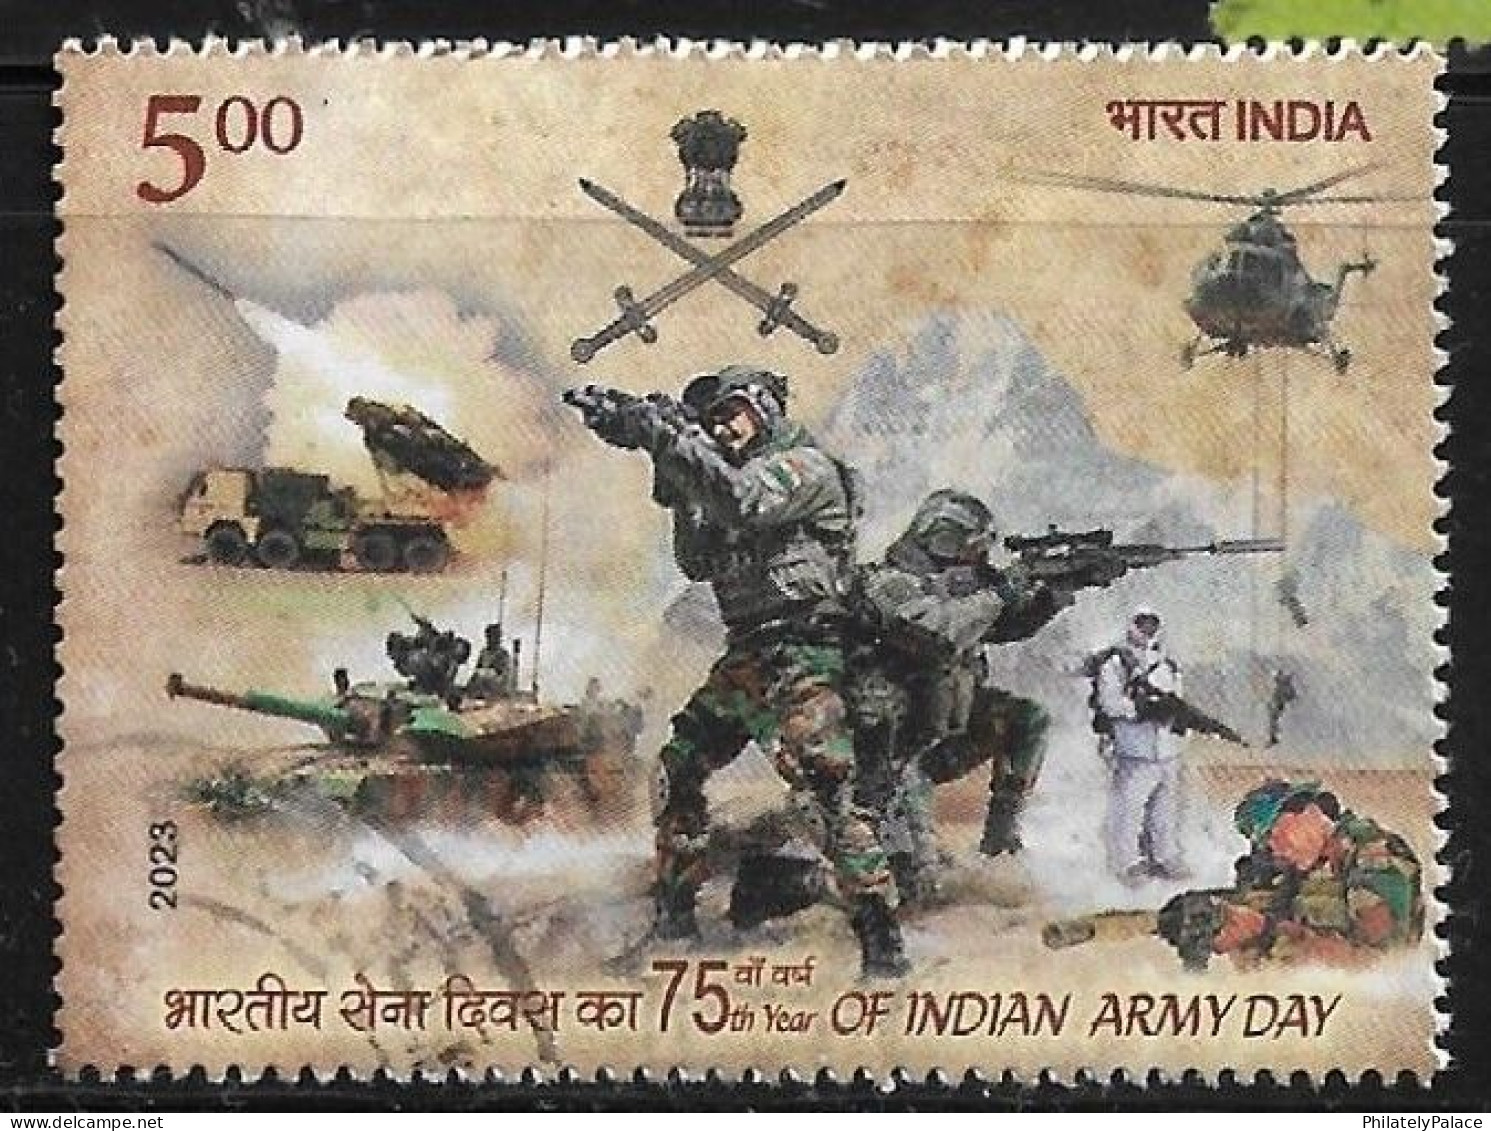 India 2023 Indian Army,Helicopter,Arjun Tank MK III,Gun,Sword,Sniper,Paratroopers,Rocket, War Used (**) Inde Indien - Used Stamps